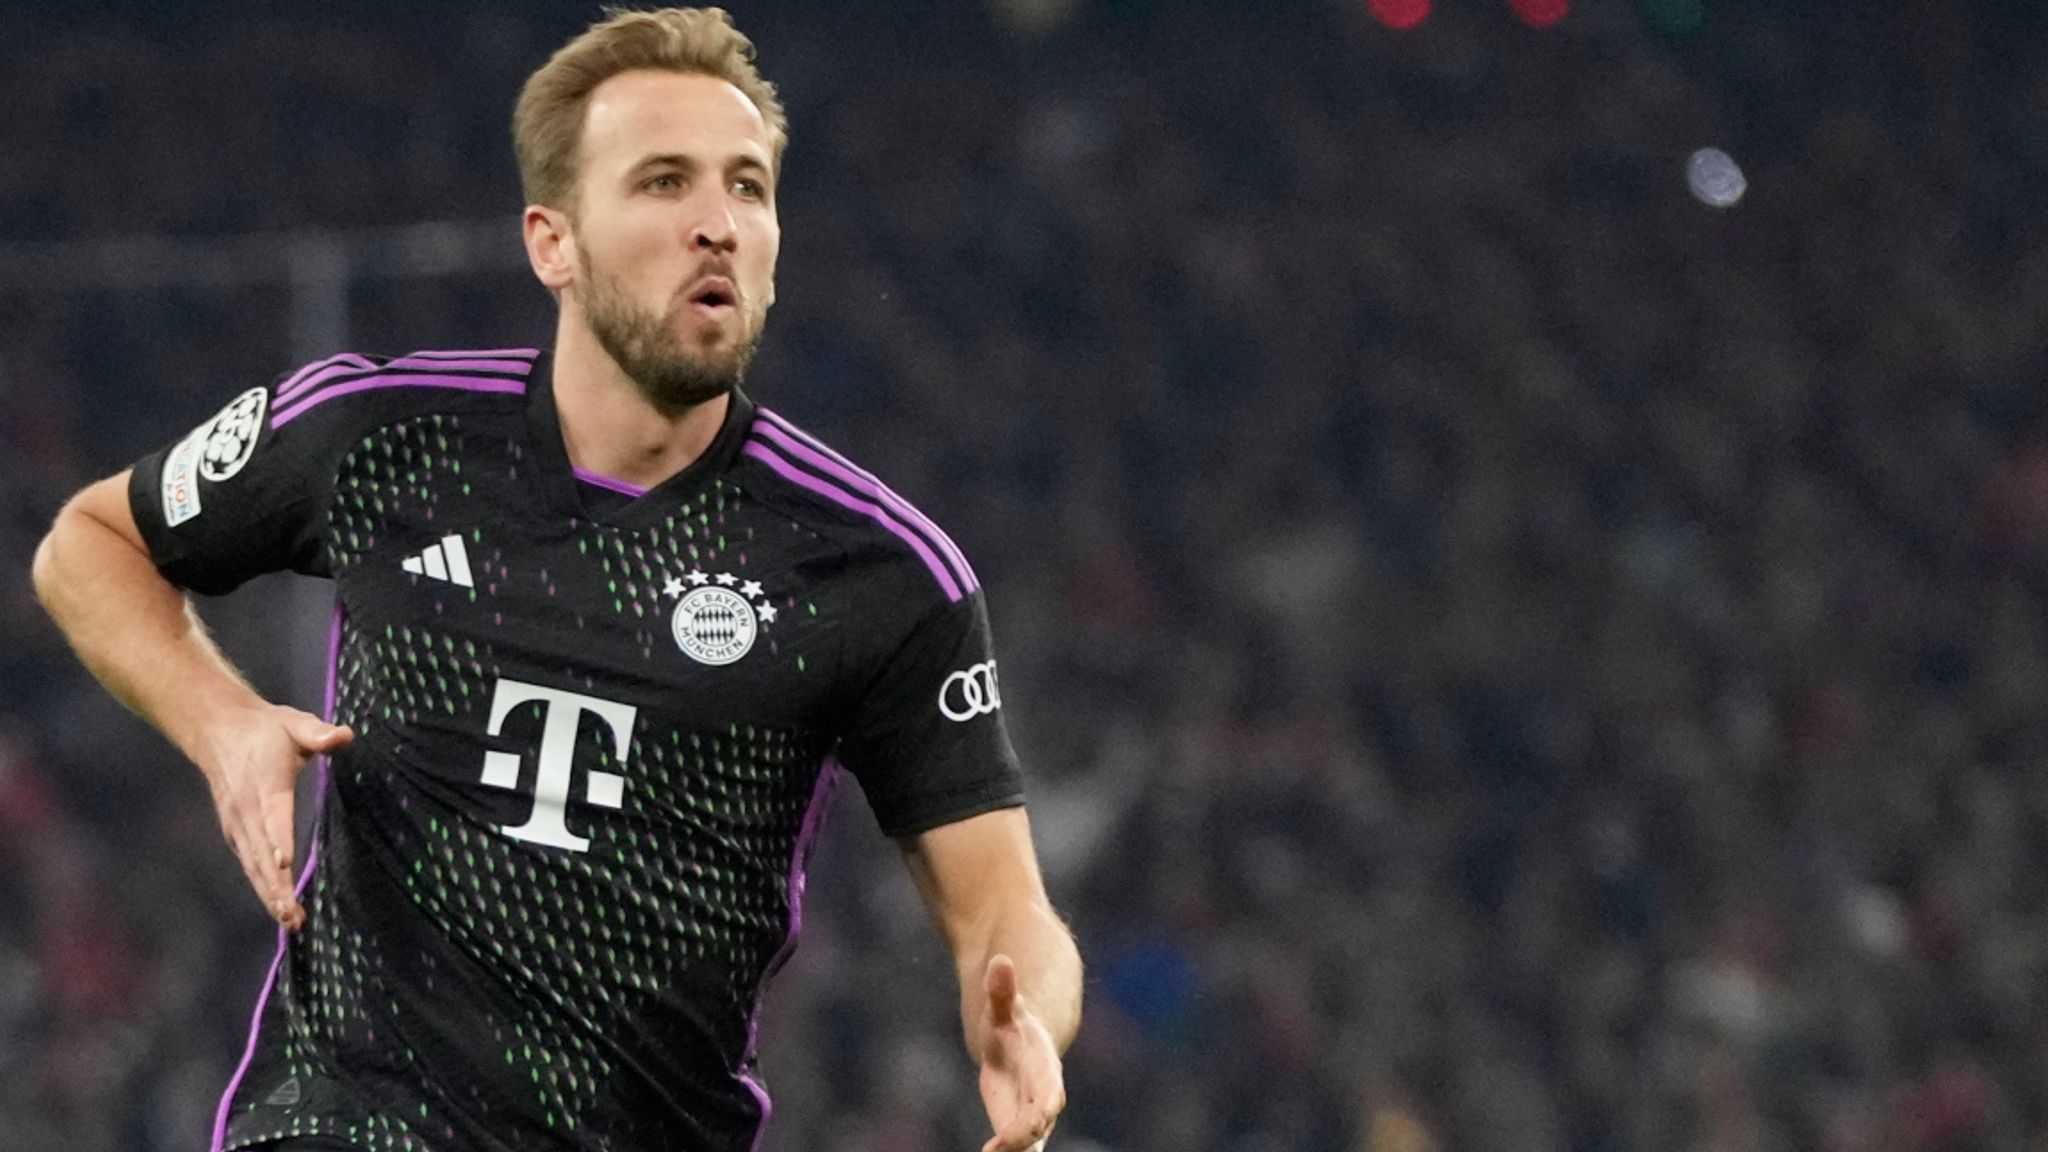  Centre forward Harry Kane is playing for Bayern Munich in a Champions League match against Tottenham Hotspur.